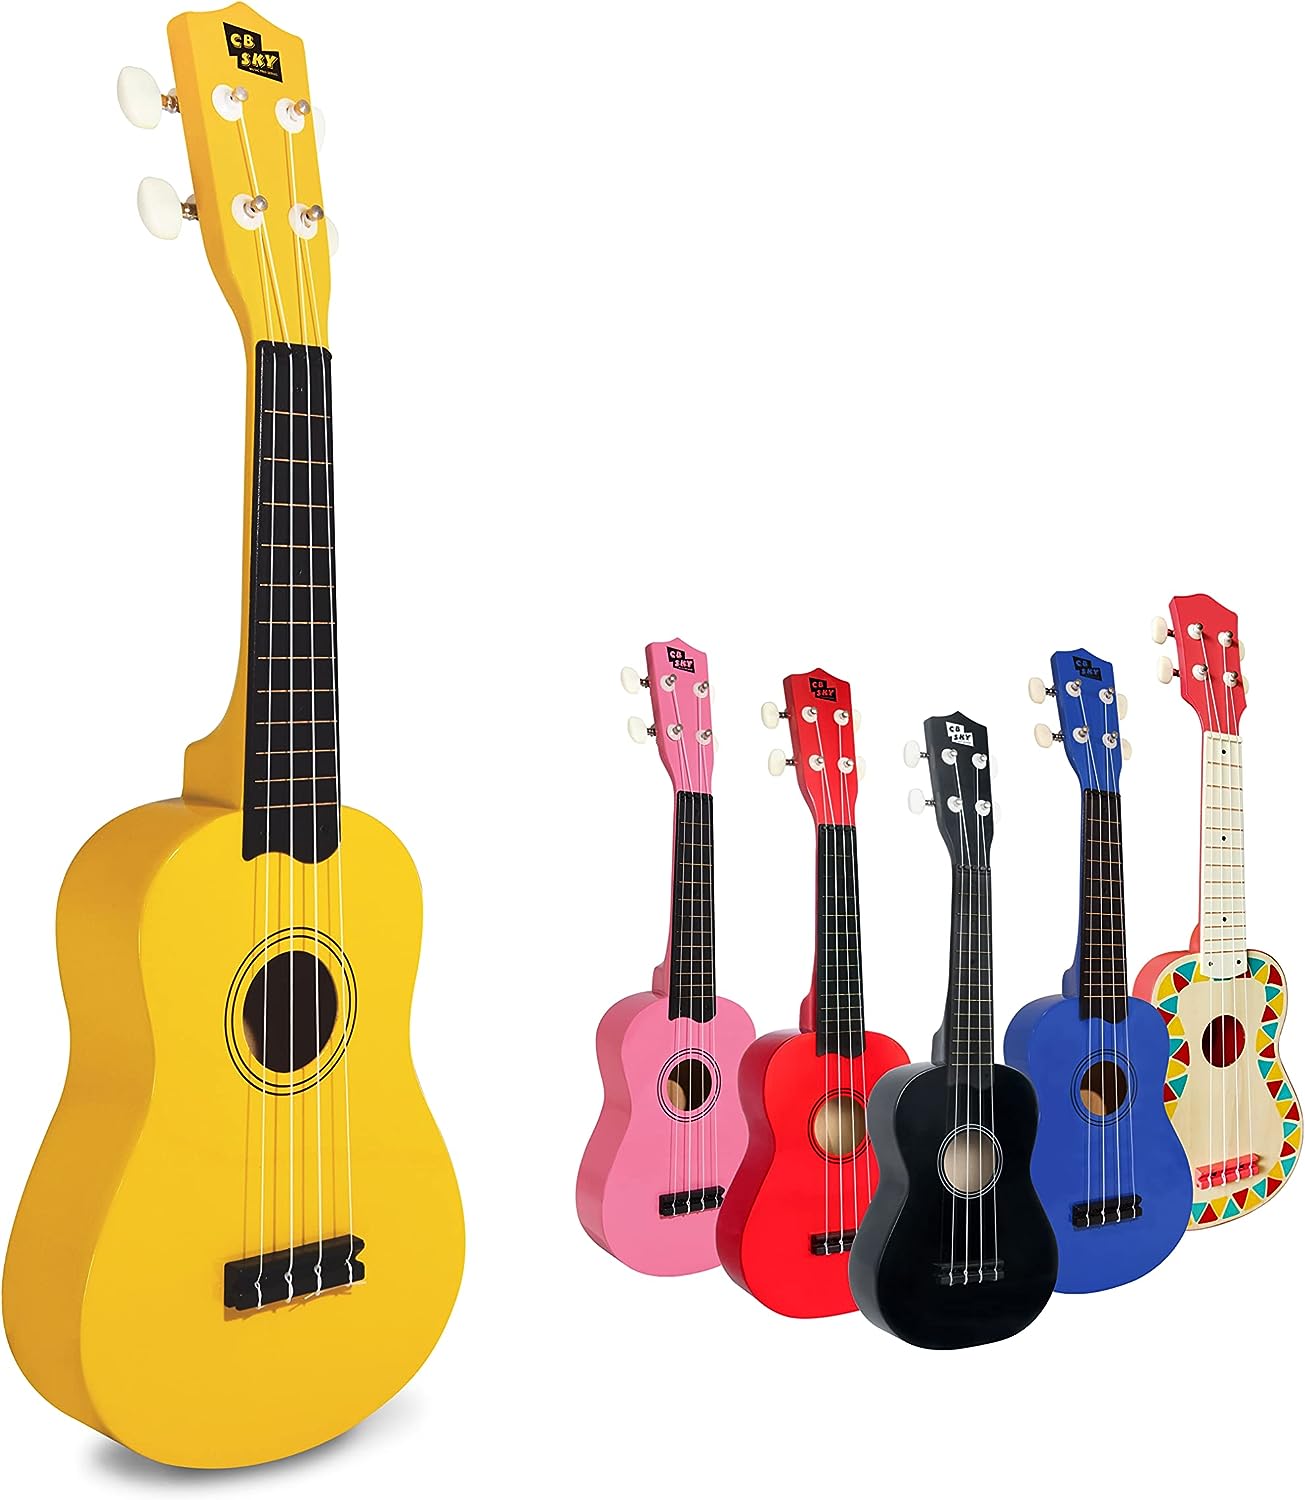 CB SKY Soprano Ukulele 21/53cm for kids, beginners and students (Yellow)